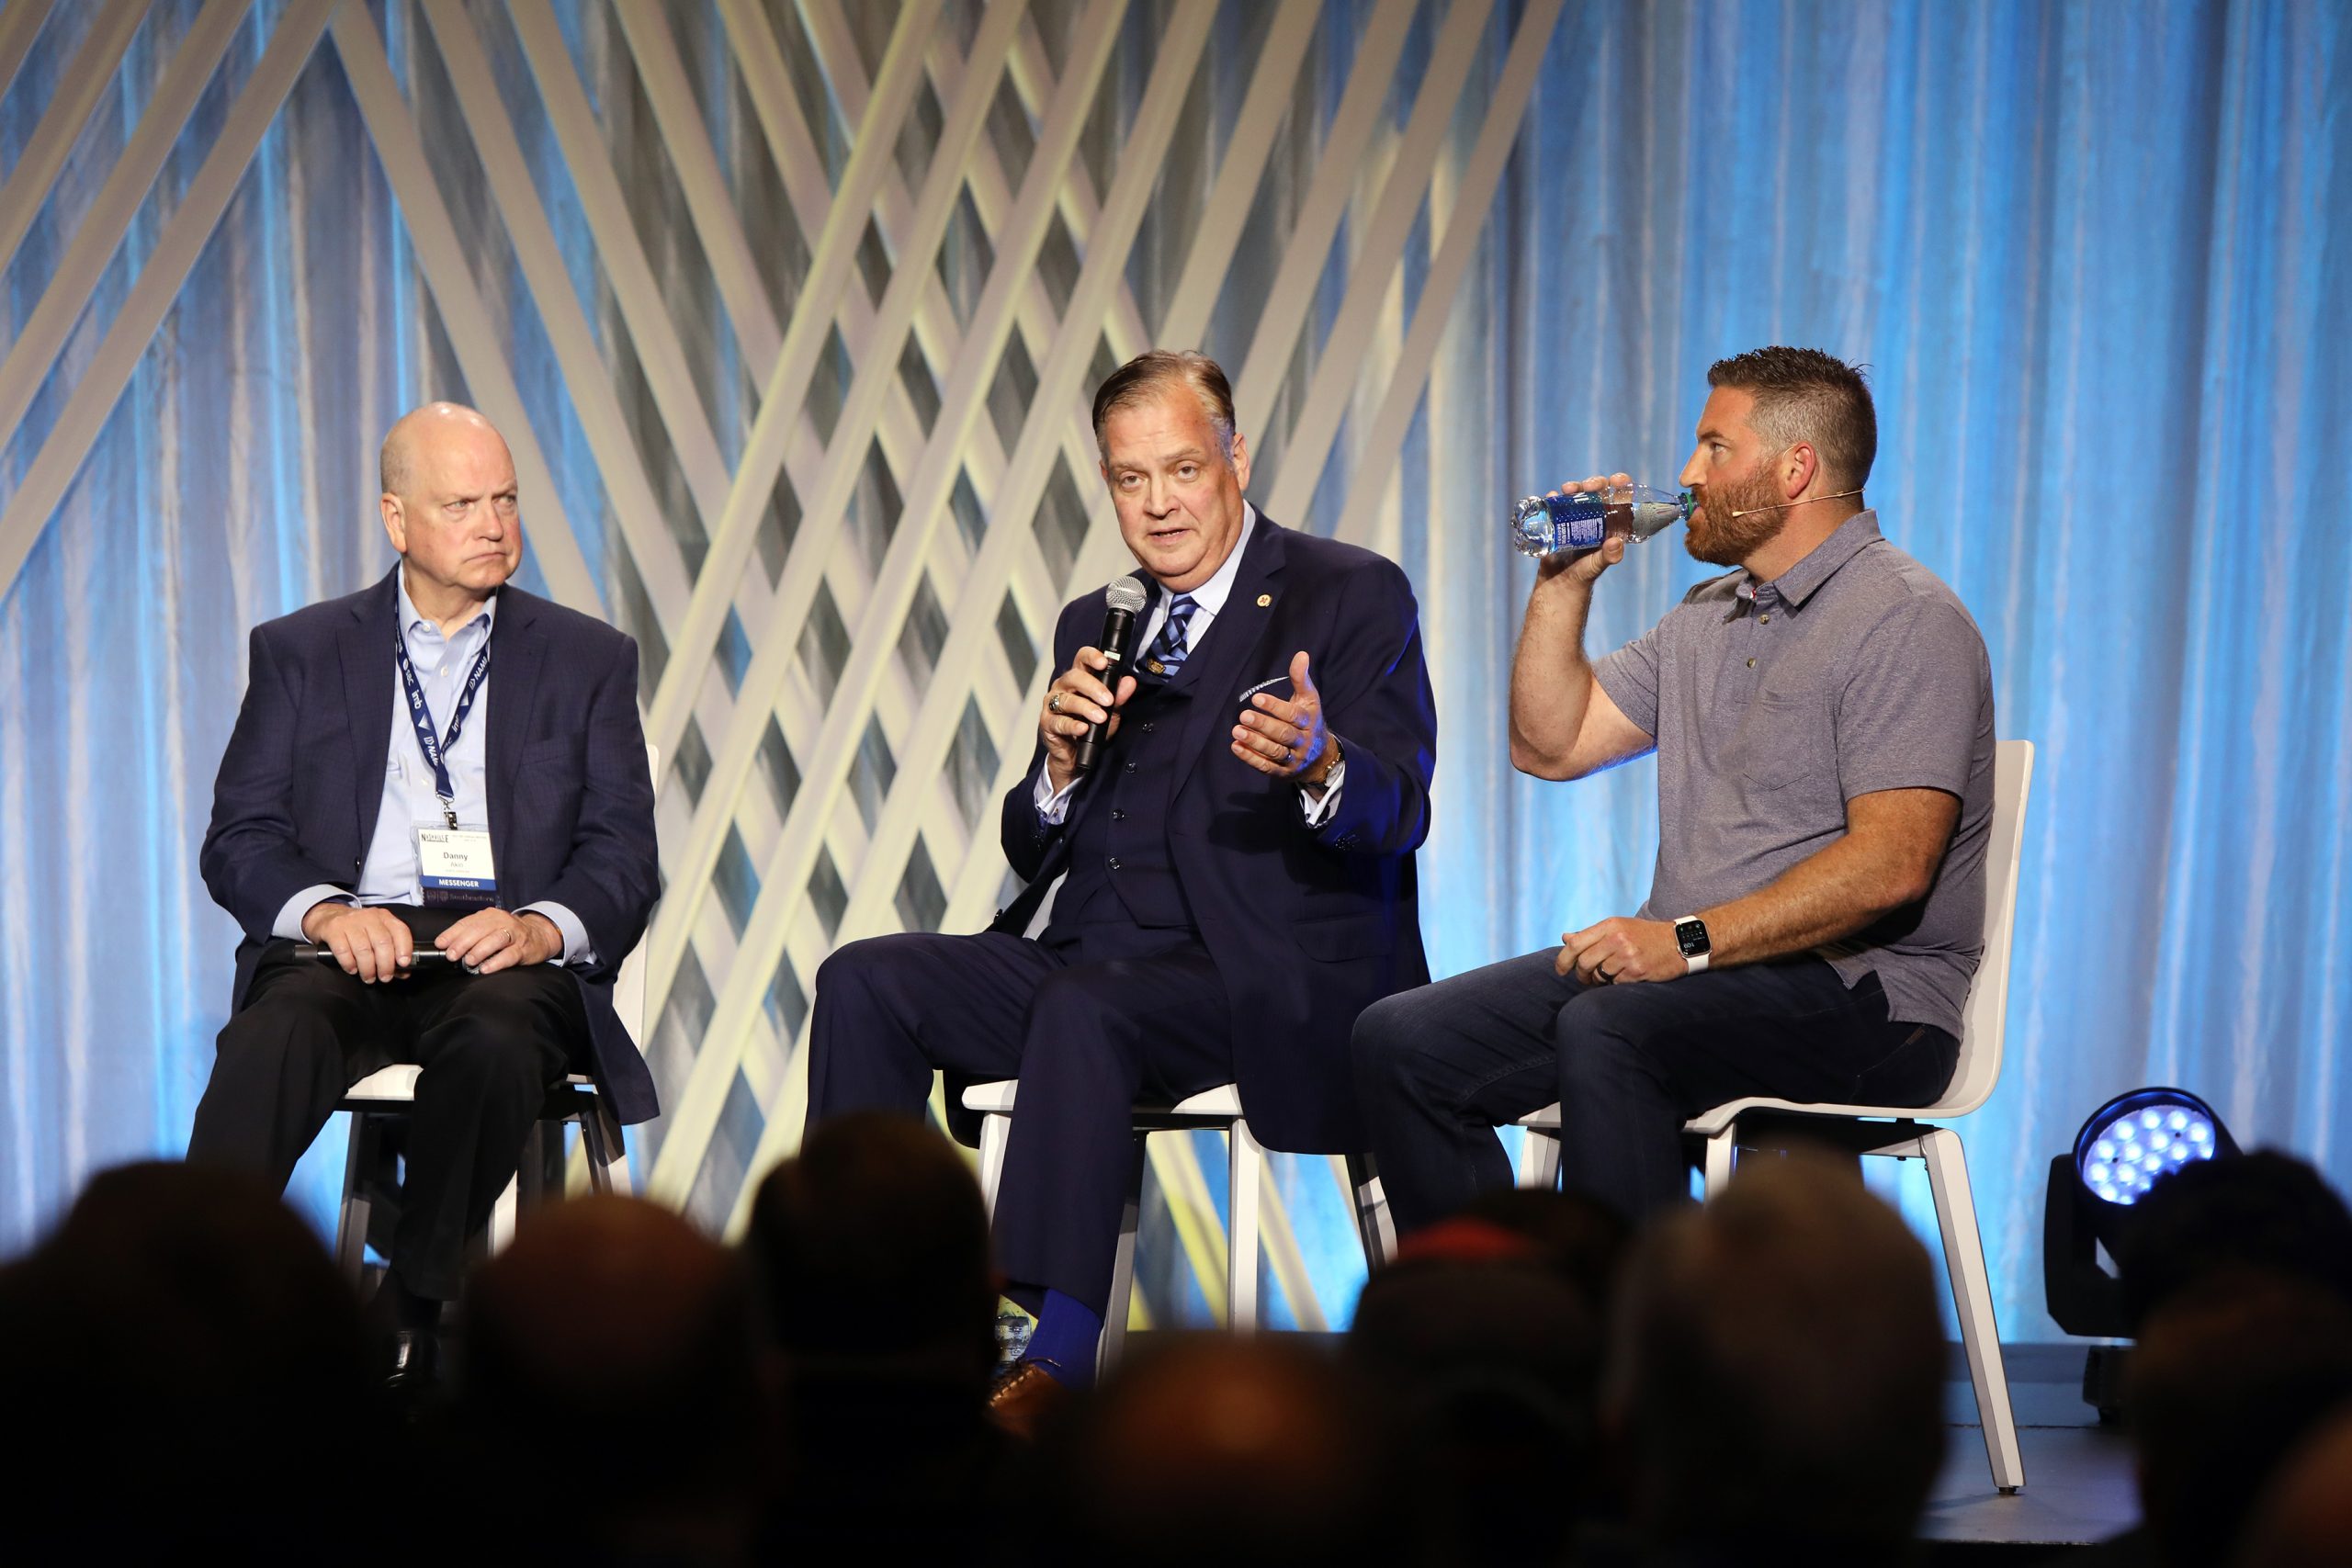 The Rev. R. Albert Mohler participates in a panel during the Southern Baptist Convention annual meeting, Tuesday, June 15, 2021, in Nashville. RNS photo by Kit Doyle